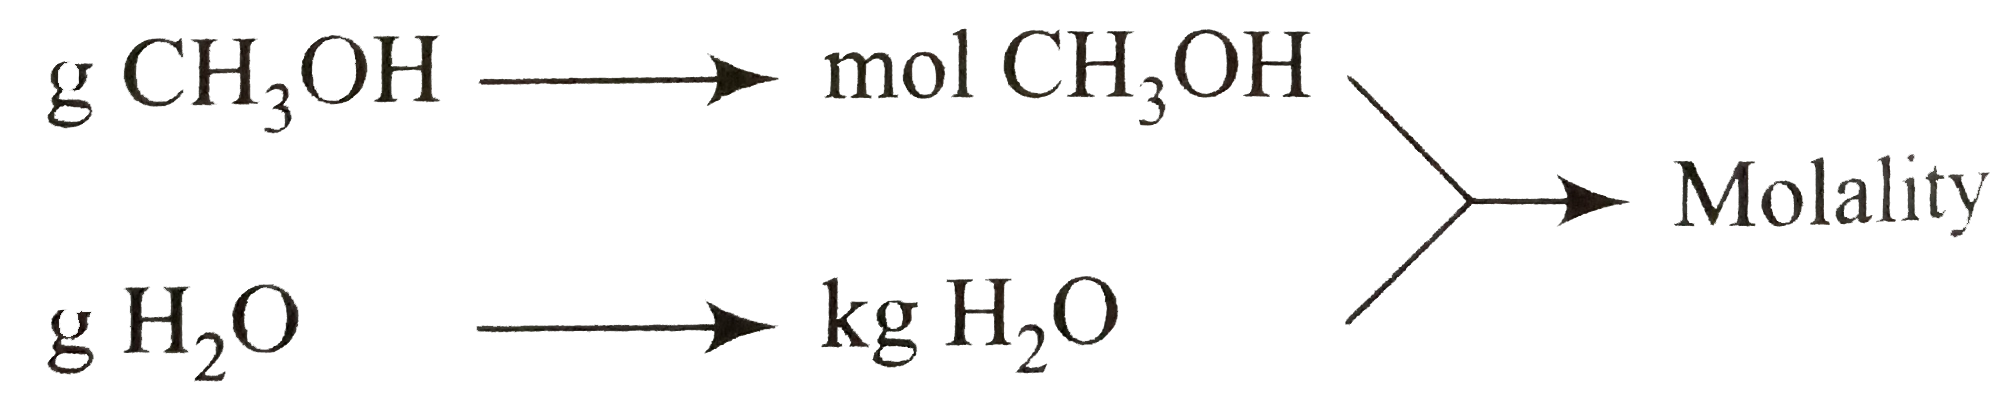 Molarlity: An acqueous solution contains 128g of mehanol  (CH(2) OH) in 108g of water. Calculate the molarity of the solution.   Strategy: Convert the grams of CH(3) OH to moles of CH(3) OH express the mass of H(2) O in kilogram and apply the definition of molality.